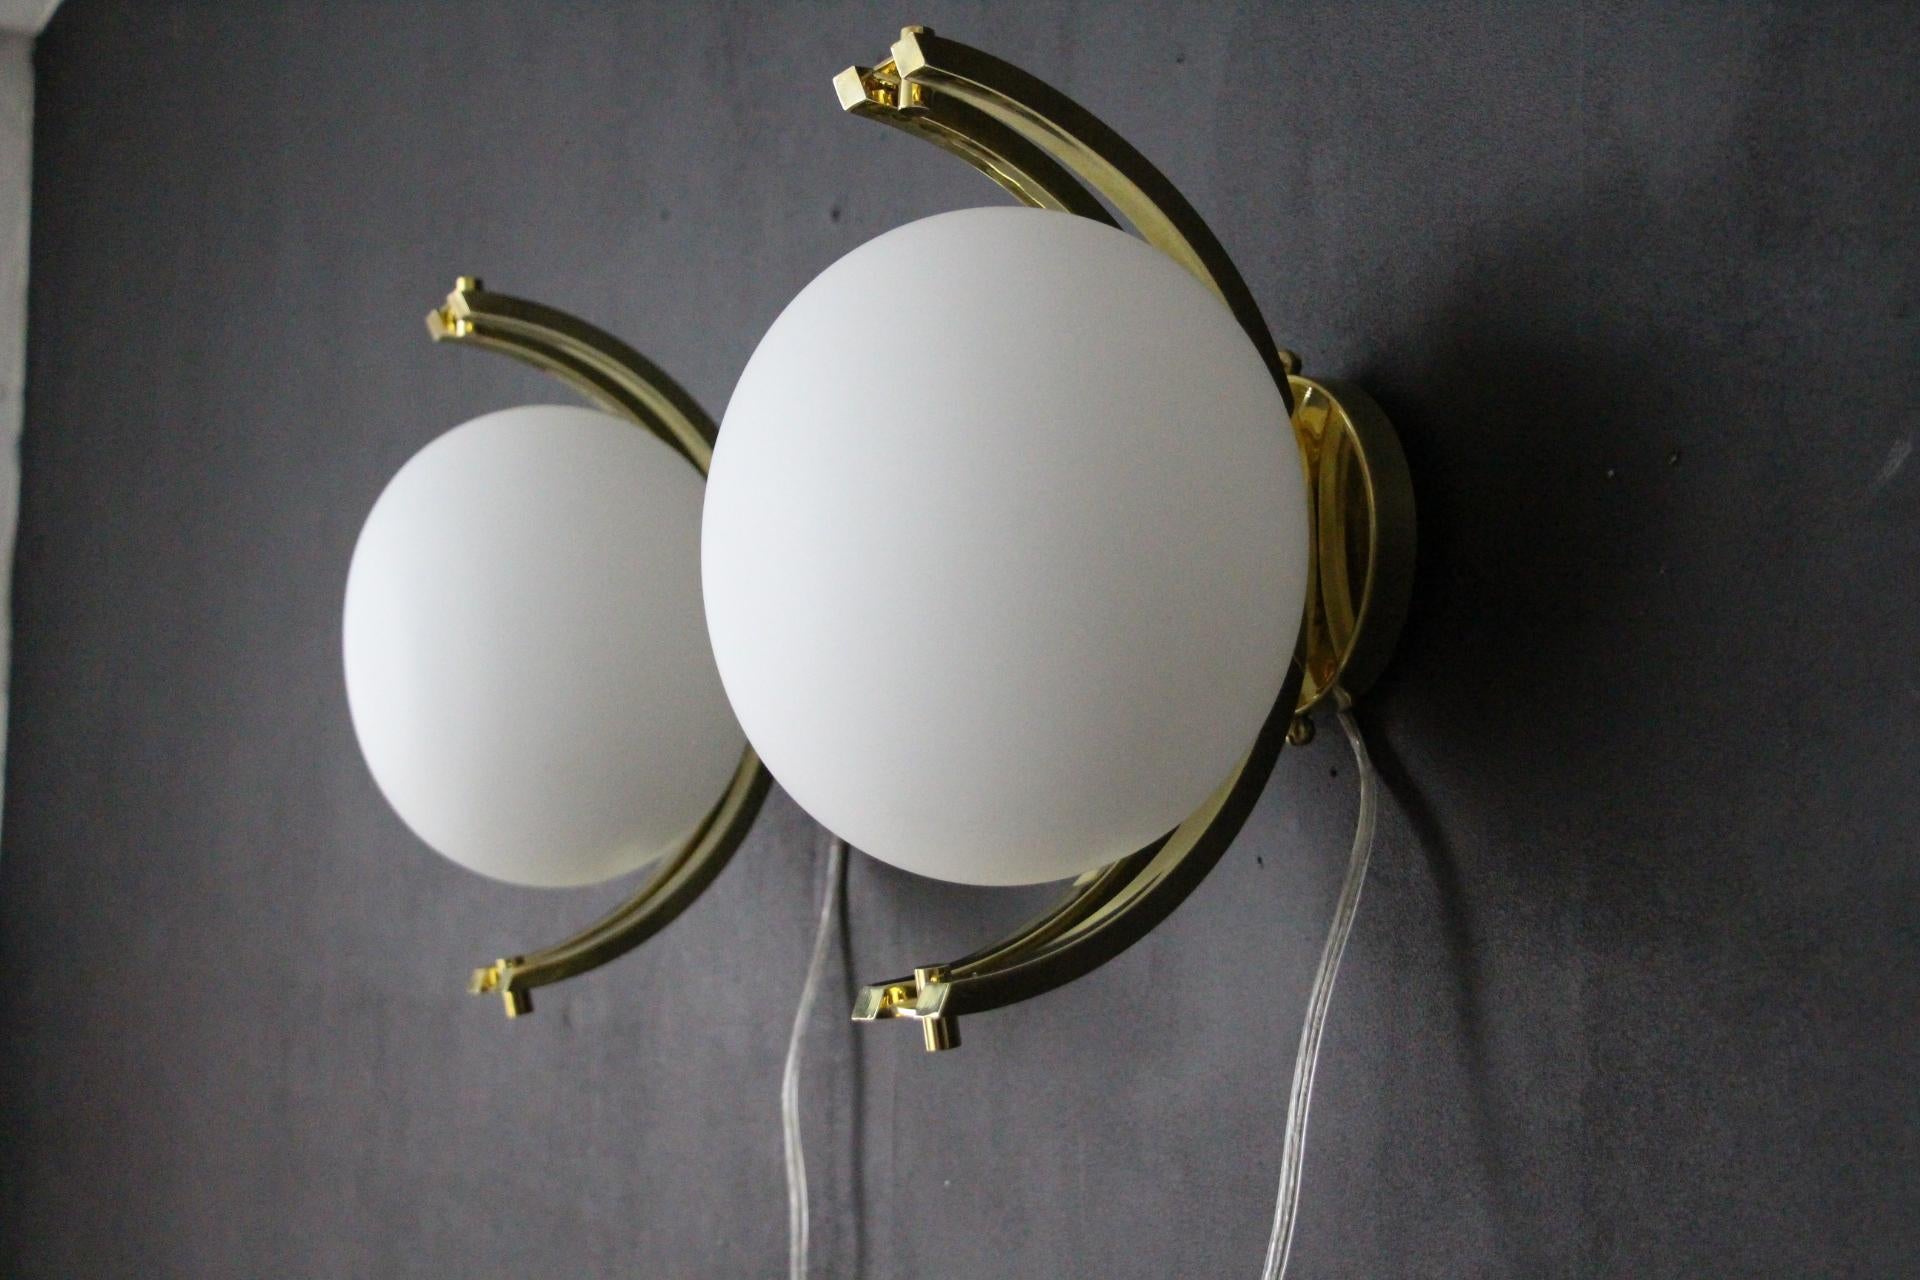 Italian Modern Pair of Brass and White Glass Globe Sconces, Stilnovo Style Wall Lights For Sale